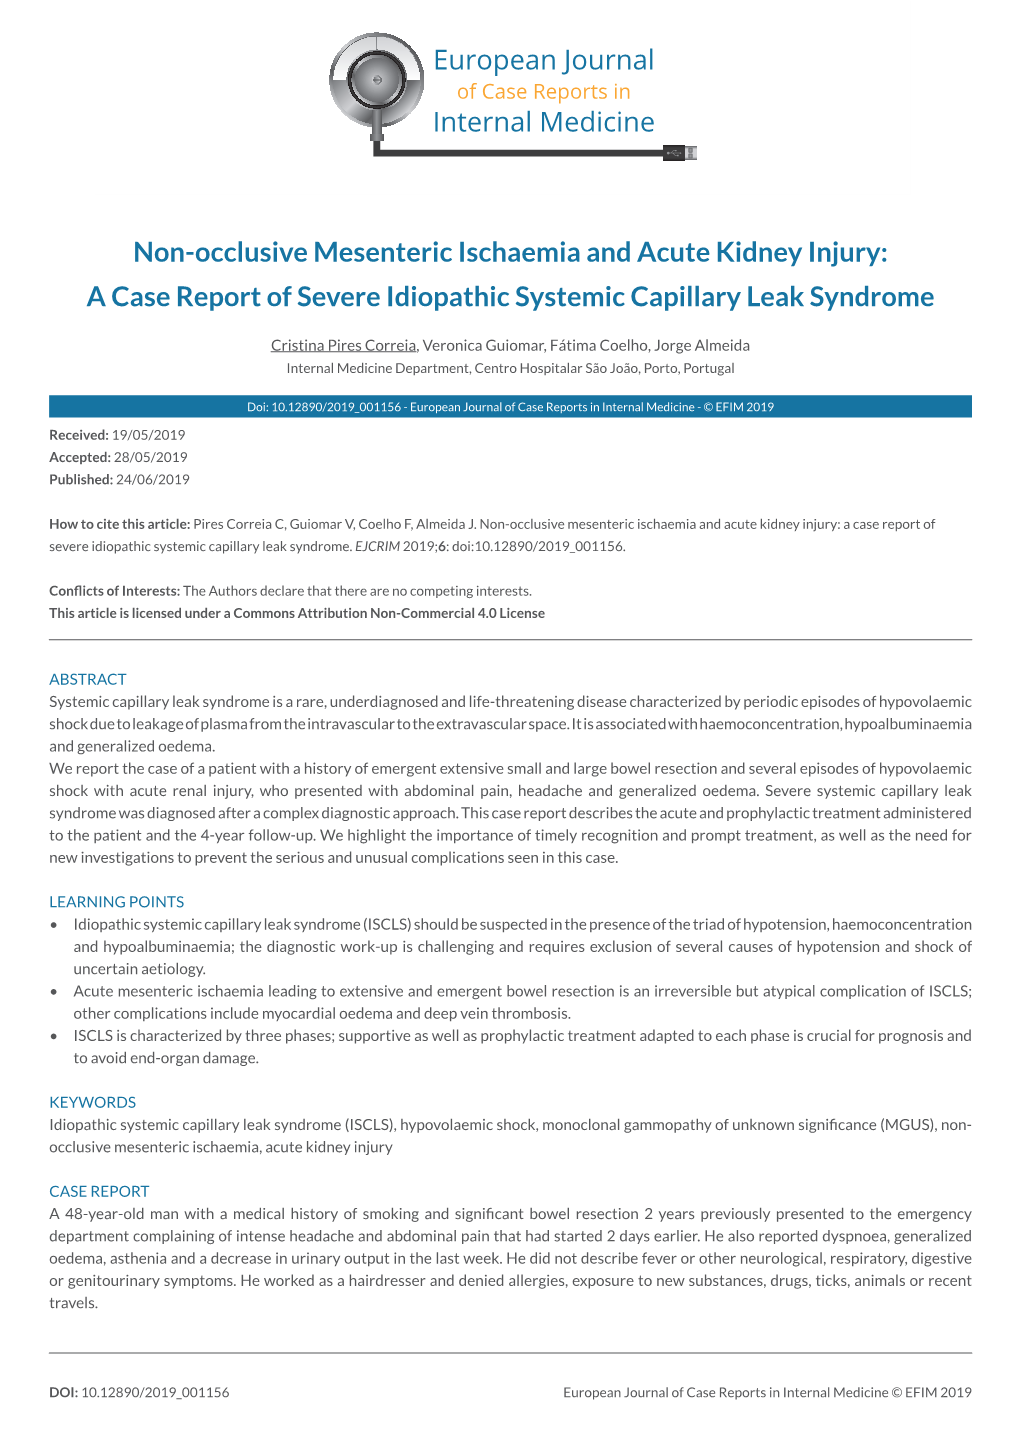 Non-Occlusive Mesenteric Ischaemia and Acute Kidney Injury: a Case Report of Severe Idiopathic Systemic Capillary Leak Syndrome